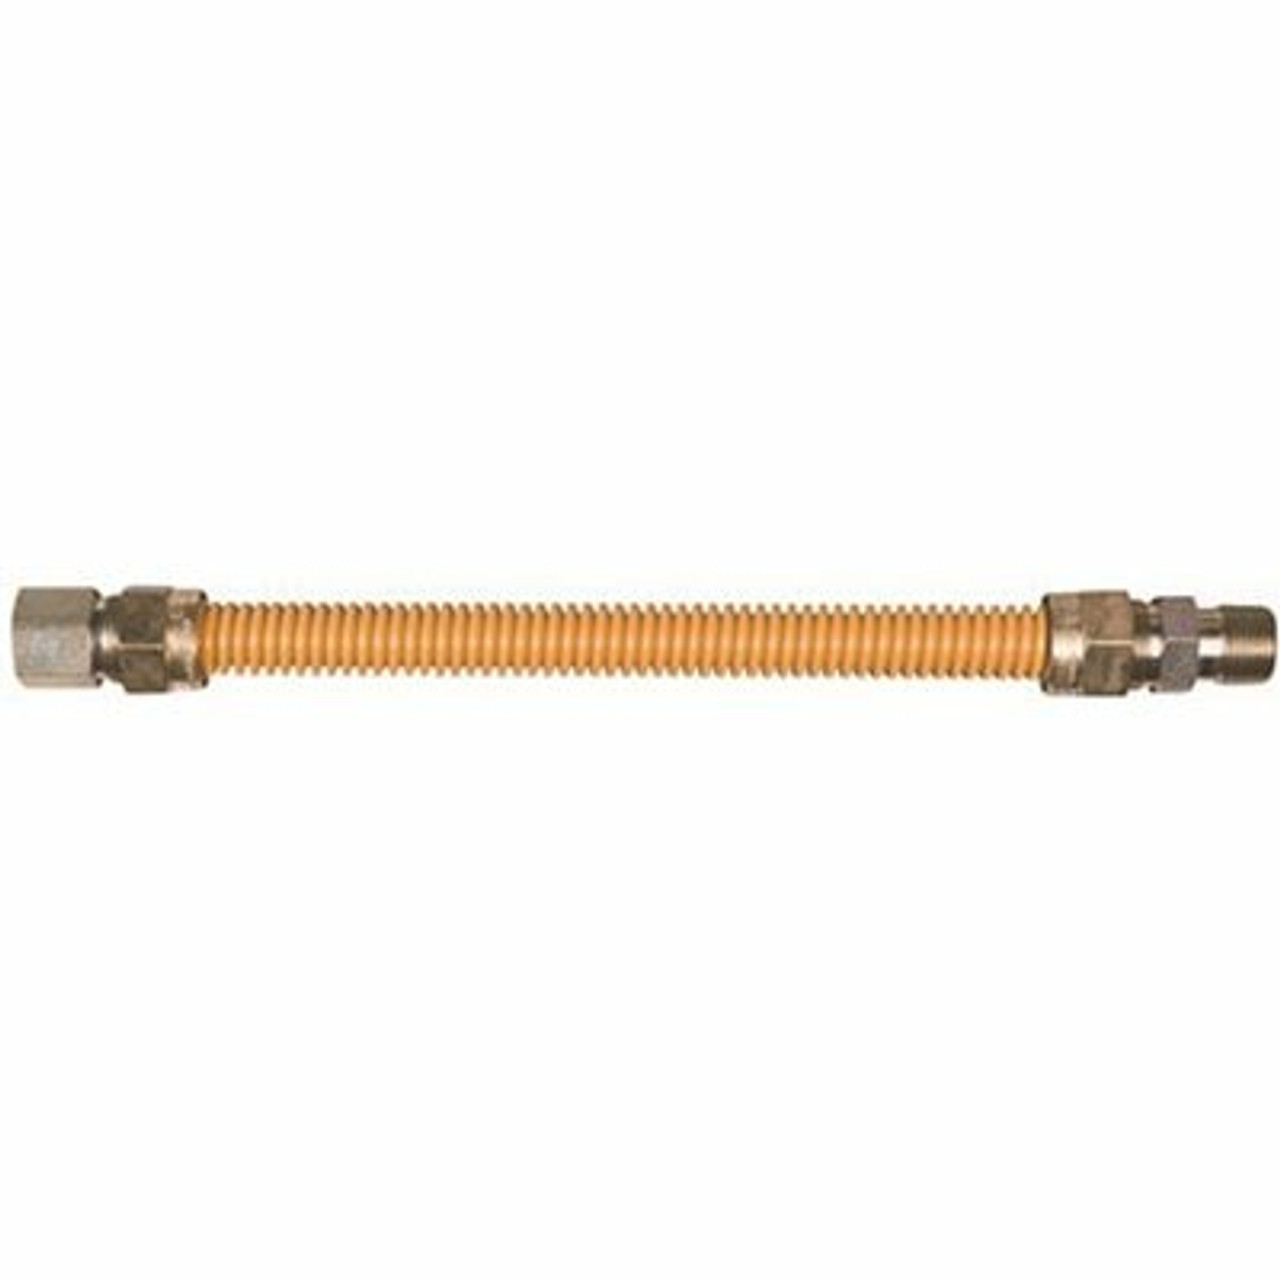 Watts Stainless Steel Gas Appliance Connector, Yellow Coated, 5/8 In. Od, 1/2 In. Id, 1/2 In. Fnpt X 1/2 In. Fnpt, 48 In. L